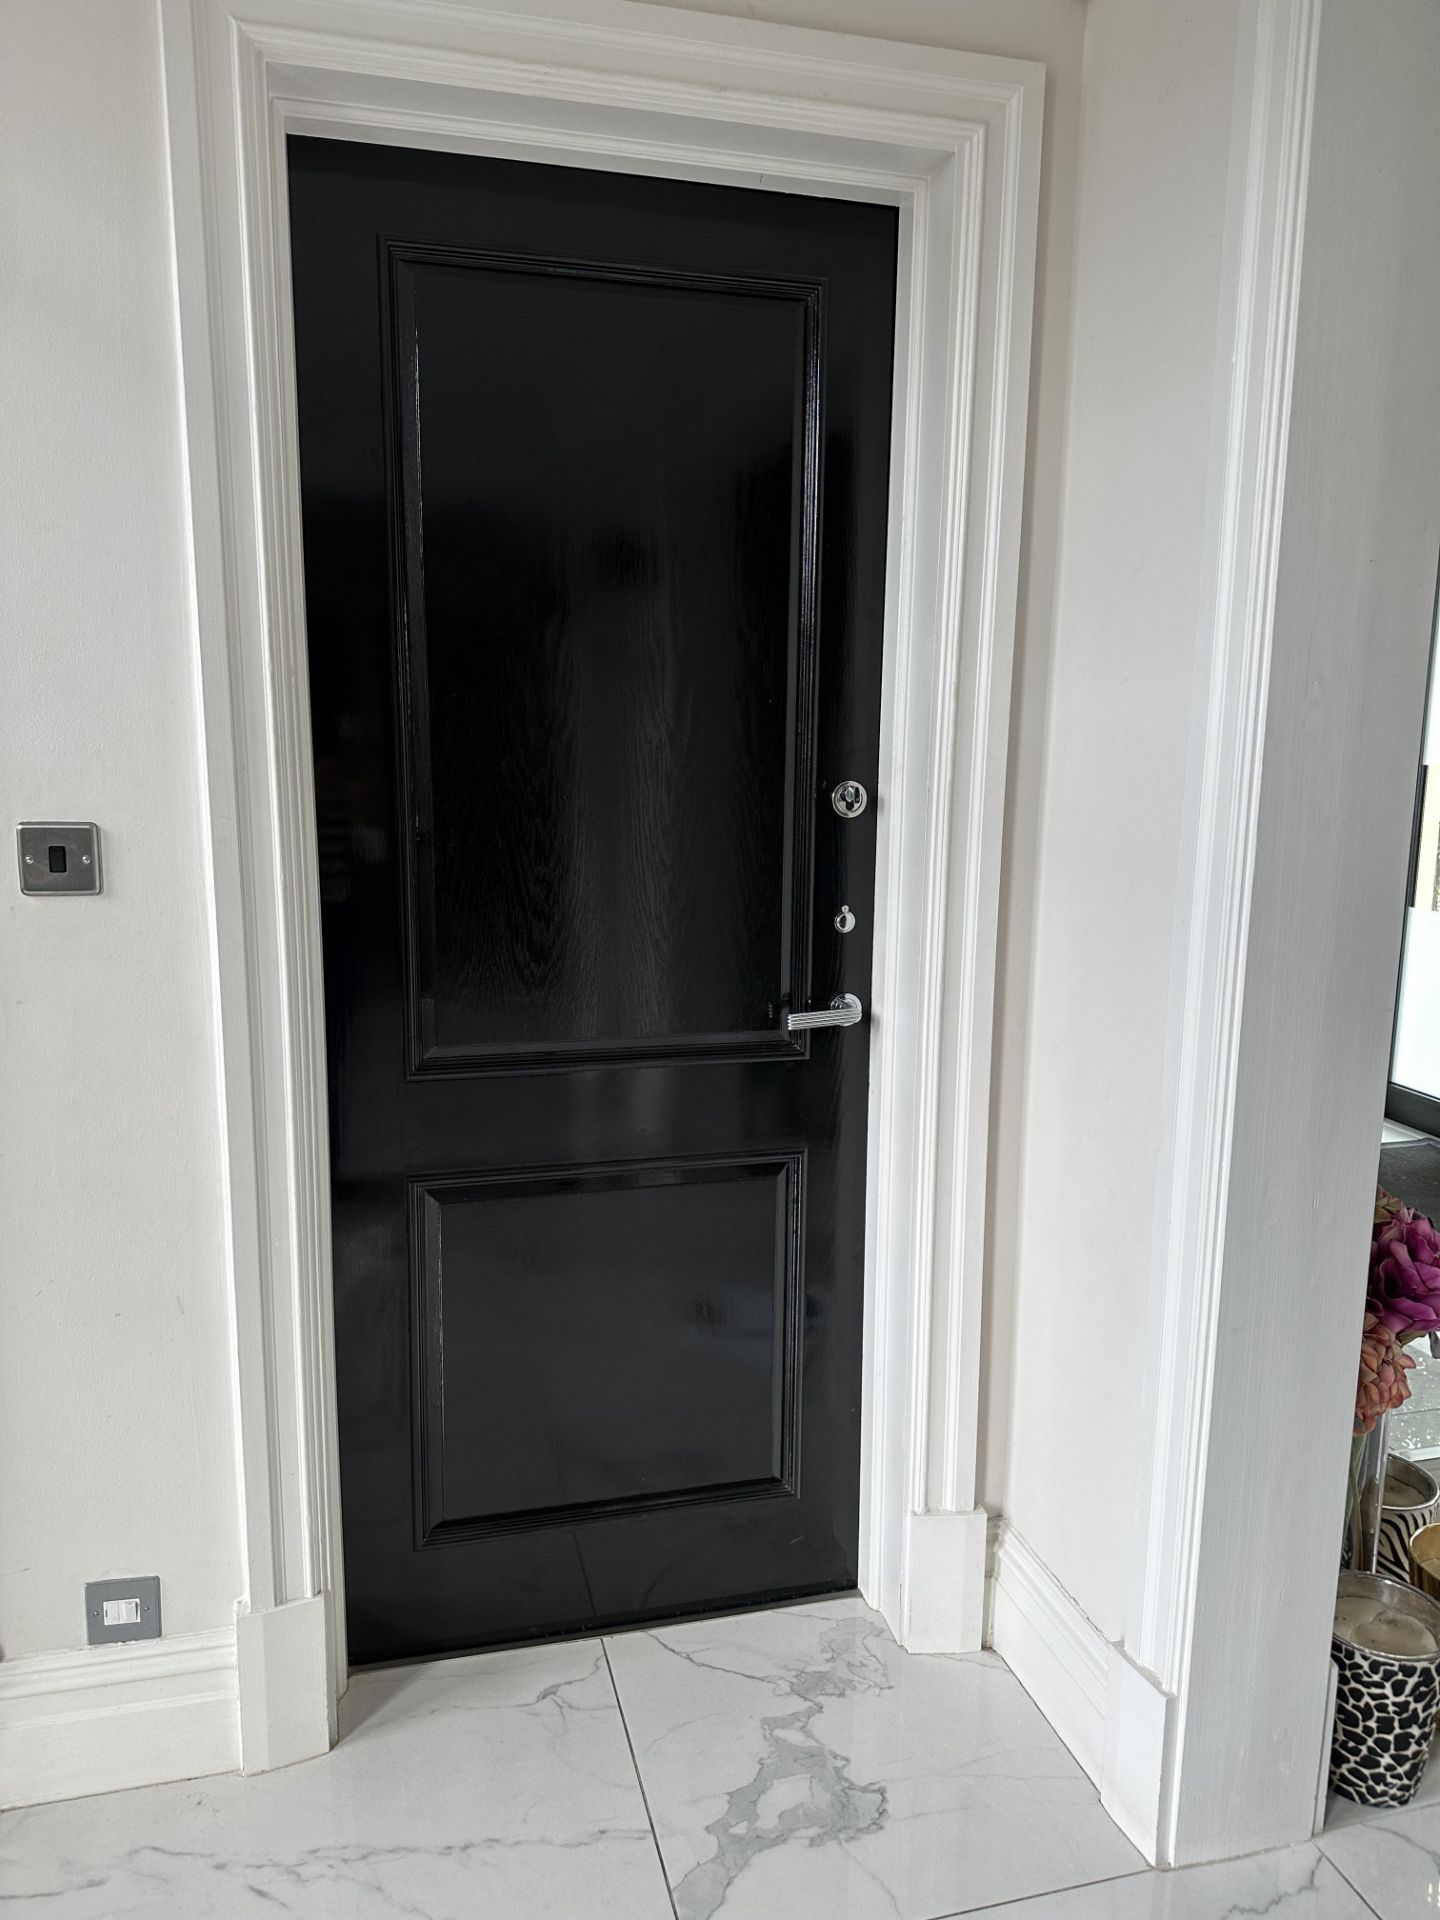 1 x SOLID OAK Black Gloss Fire Door And Stainless Steel Hardware